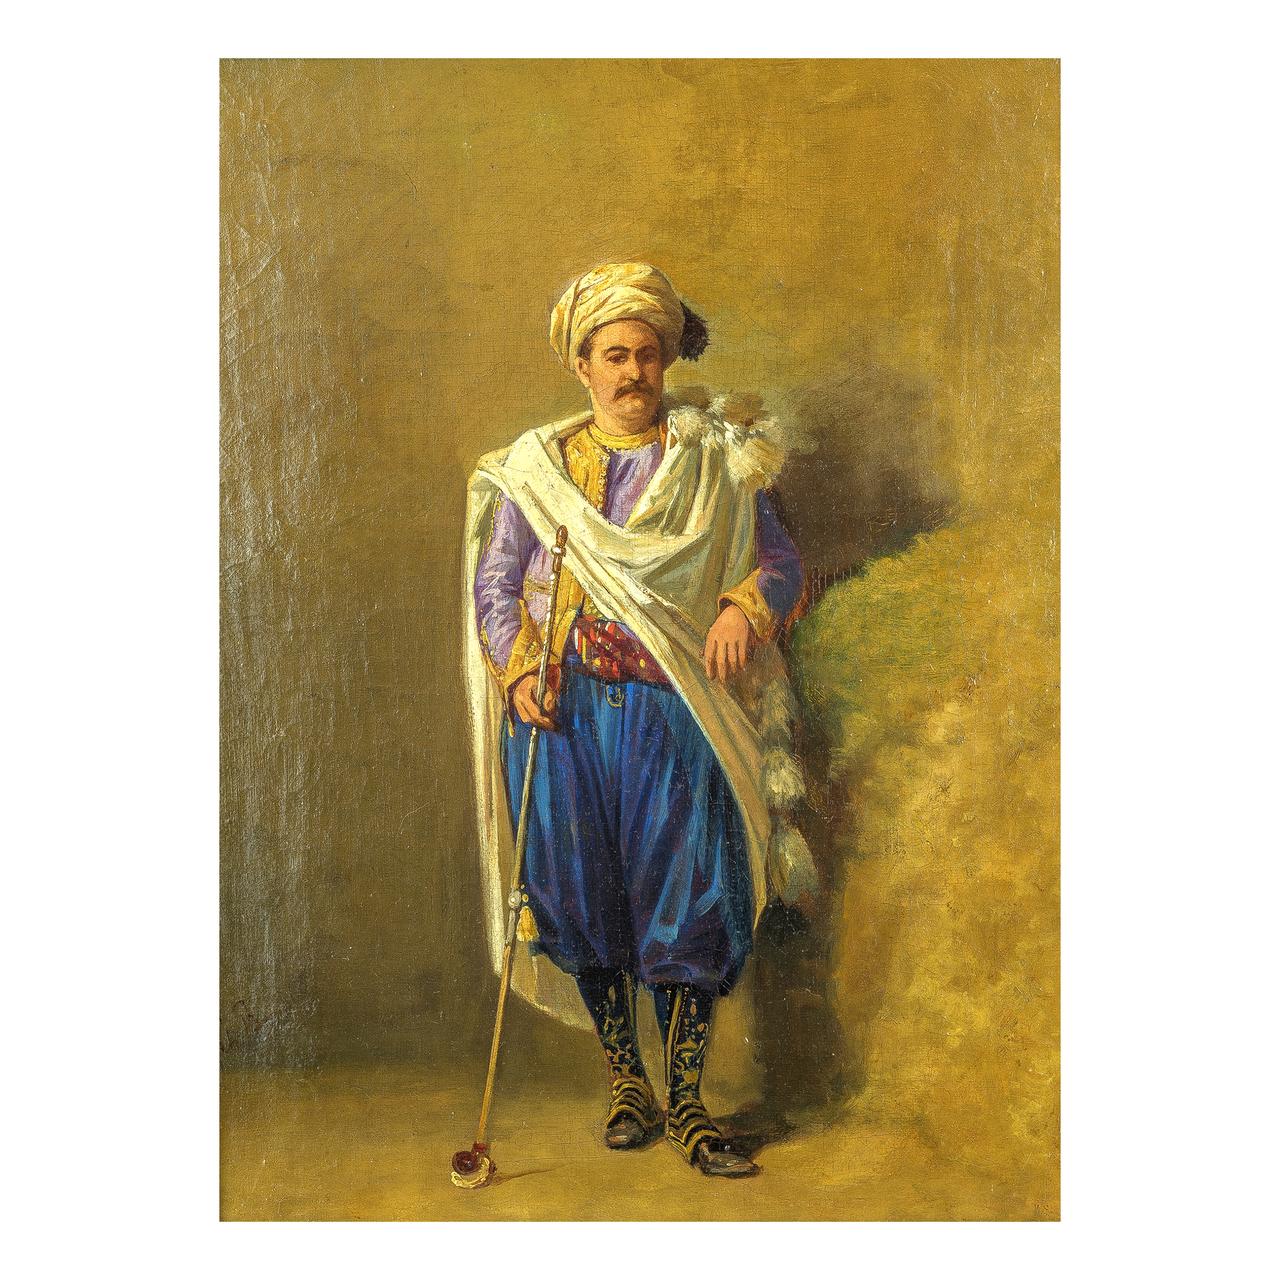 Ottoman holding a Tophane pipe

Louis Charles Bombled
French, 1862-1927

Signed ‘Ch. Bombled’ 

Oil on canvas
14 x 10 1/2 inches 
Framed: 16 x 12 1/2 inches.